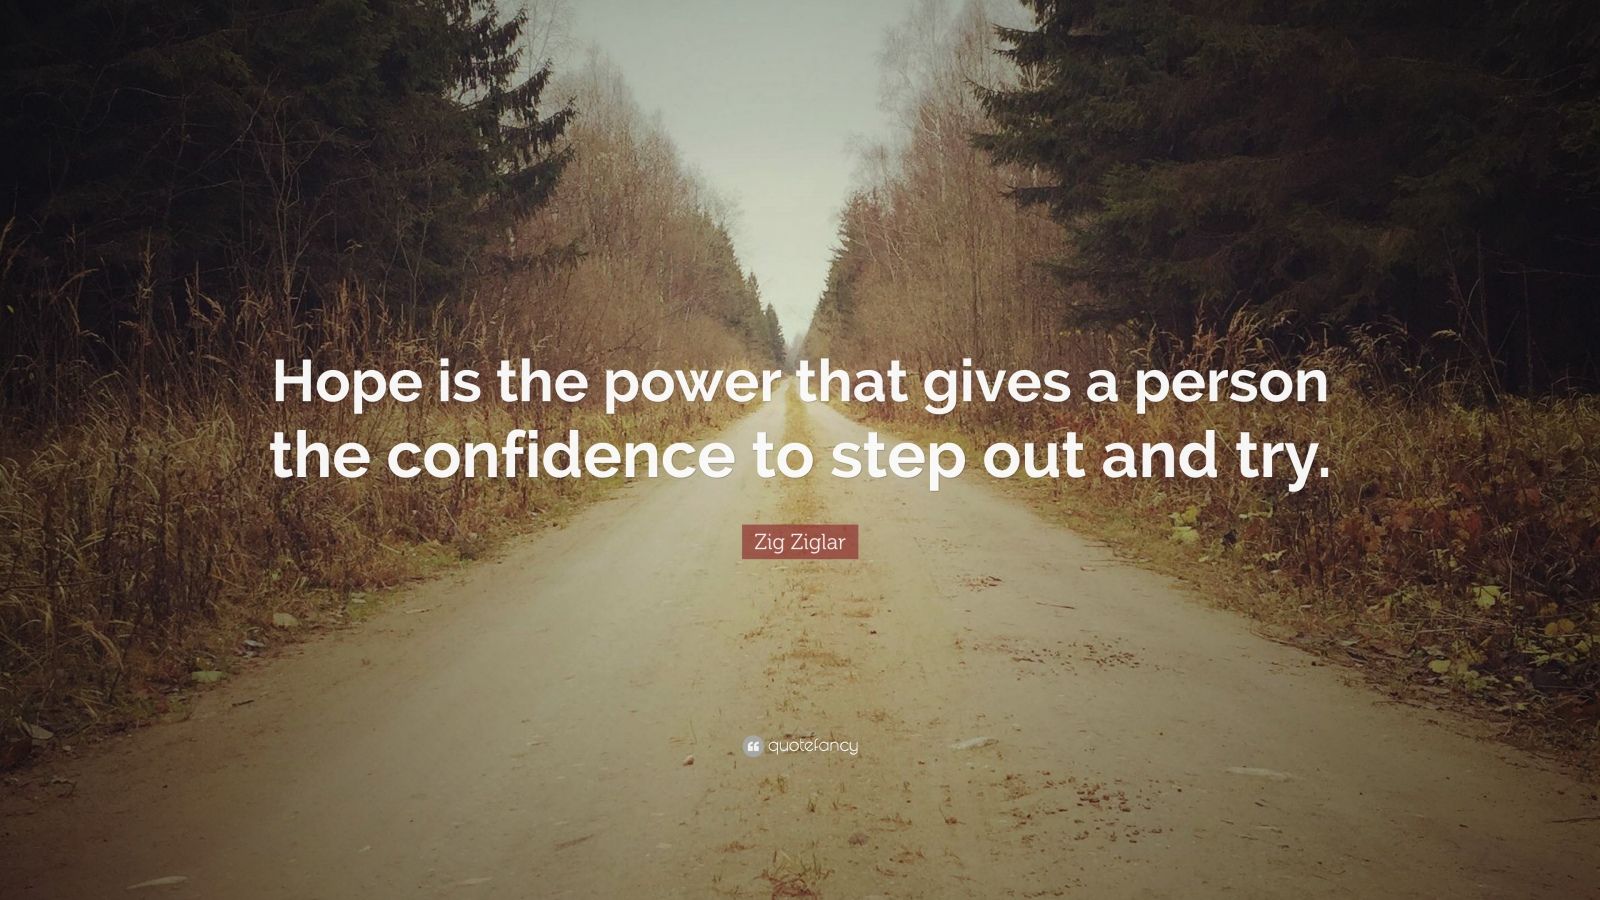 Zig Ziglar Quote: “Hope is the power that gives a person the confidence ...